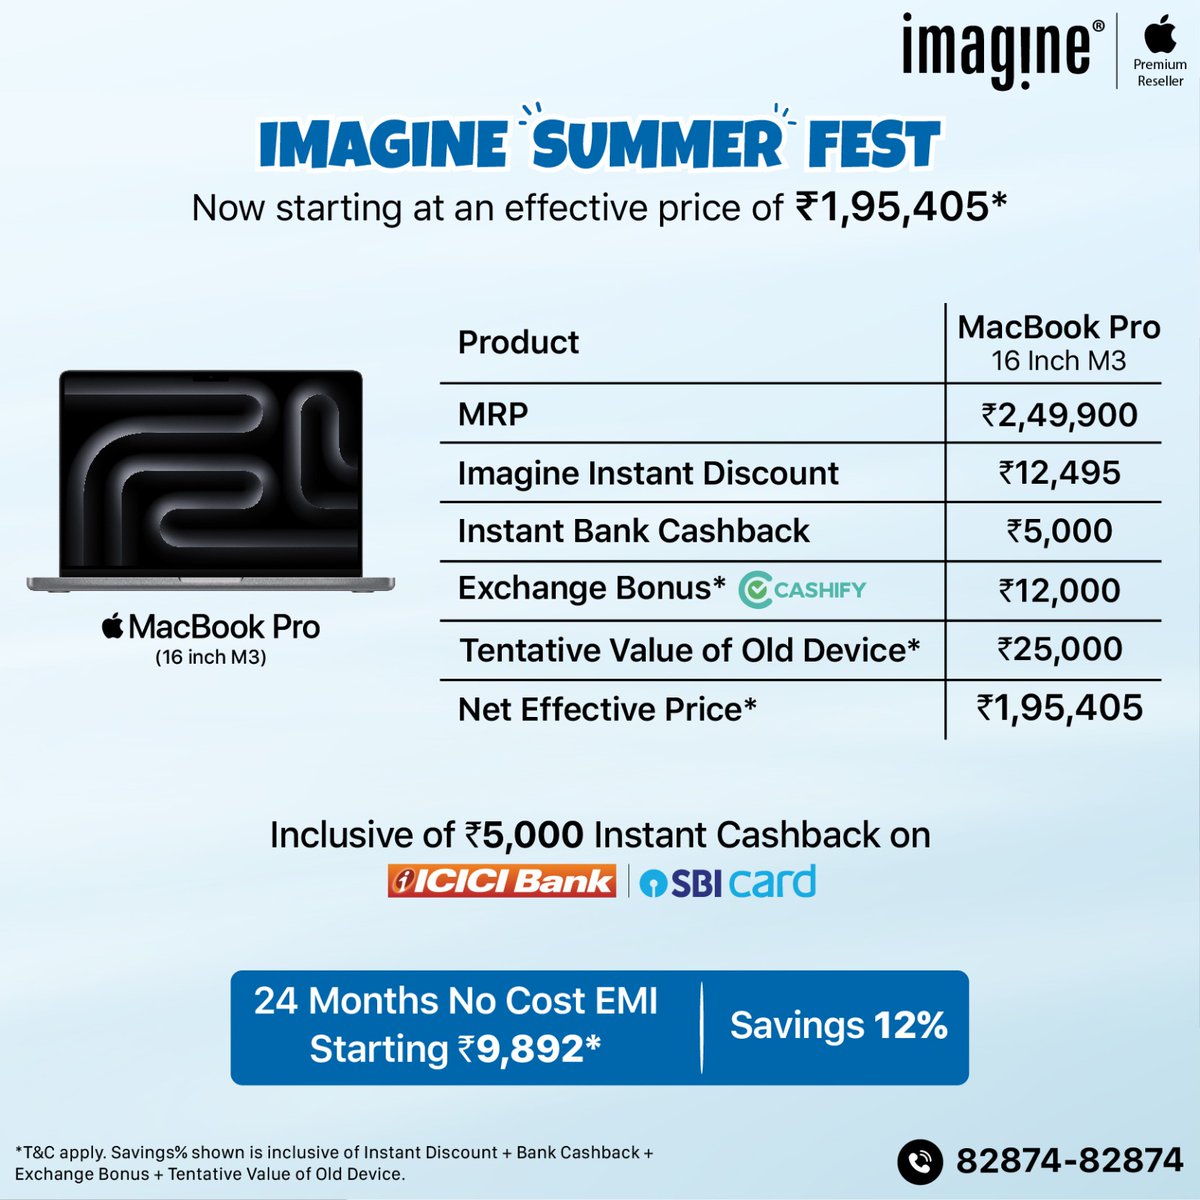 Celebrate Summer at Imagine: Exclusive Apple Deals Await! 🌞 MacBook Pro starting at an effective price of ₹1,14,308* ✅ Upto ₹5,000* Instant Cashback on select banks ✅ Upto ₹13,592* Instant In-store discount ✅ Upto ₹12,000* Exchange bonus ✅ GST Invoice available ✅ Upto